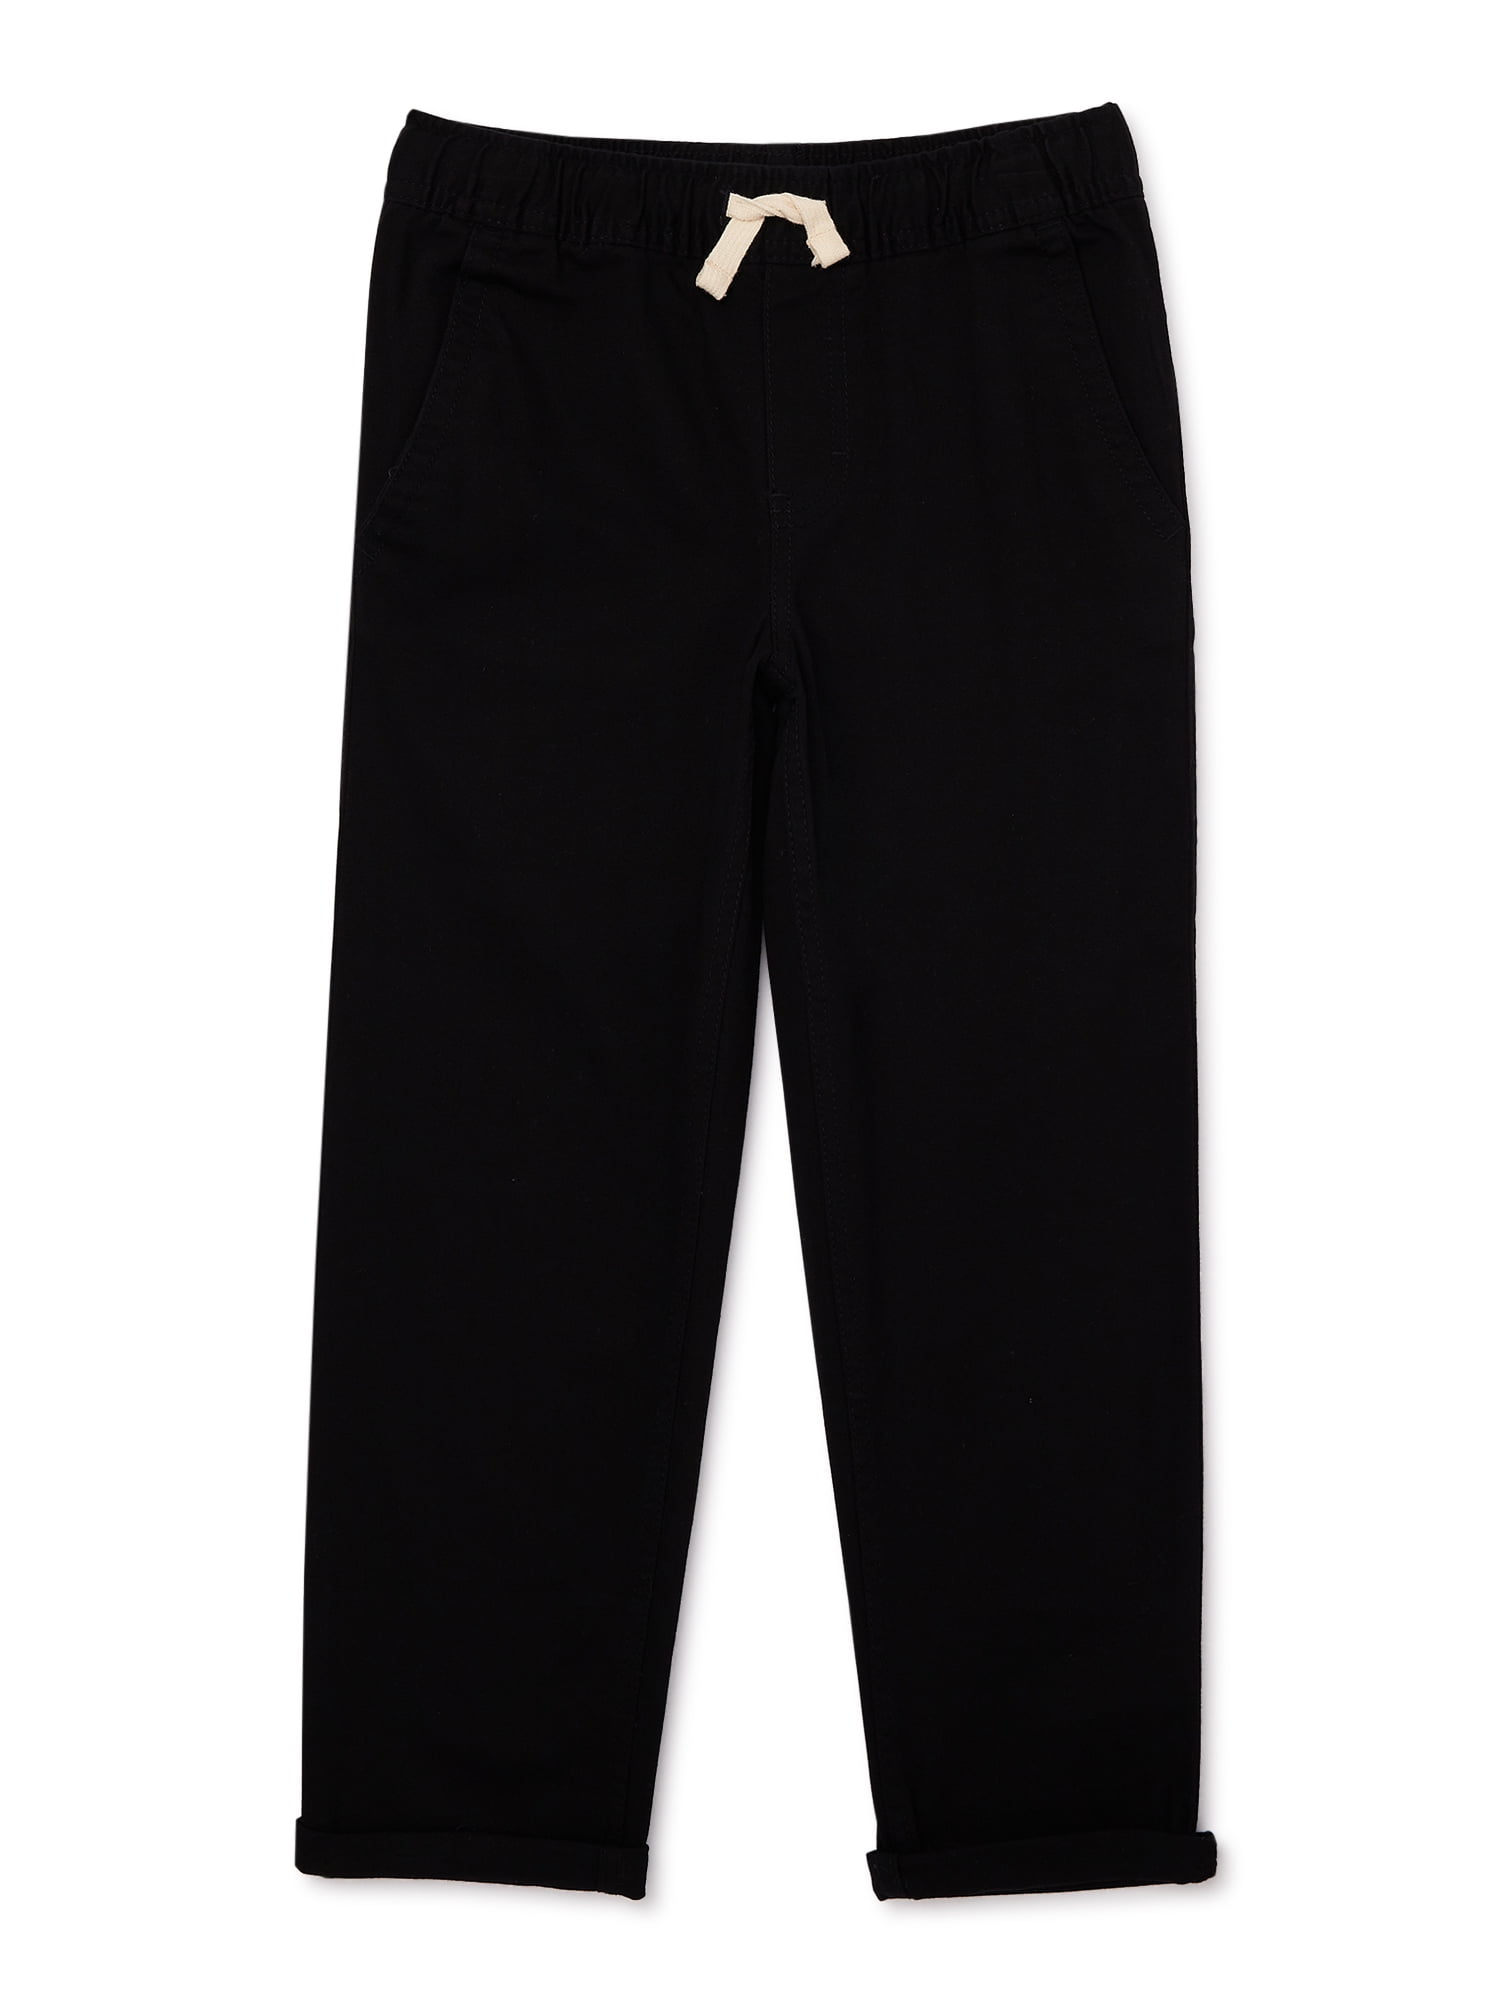 Kids Off-White Logo Lounge Pants by Fear of God ESSENTIALS on Sale